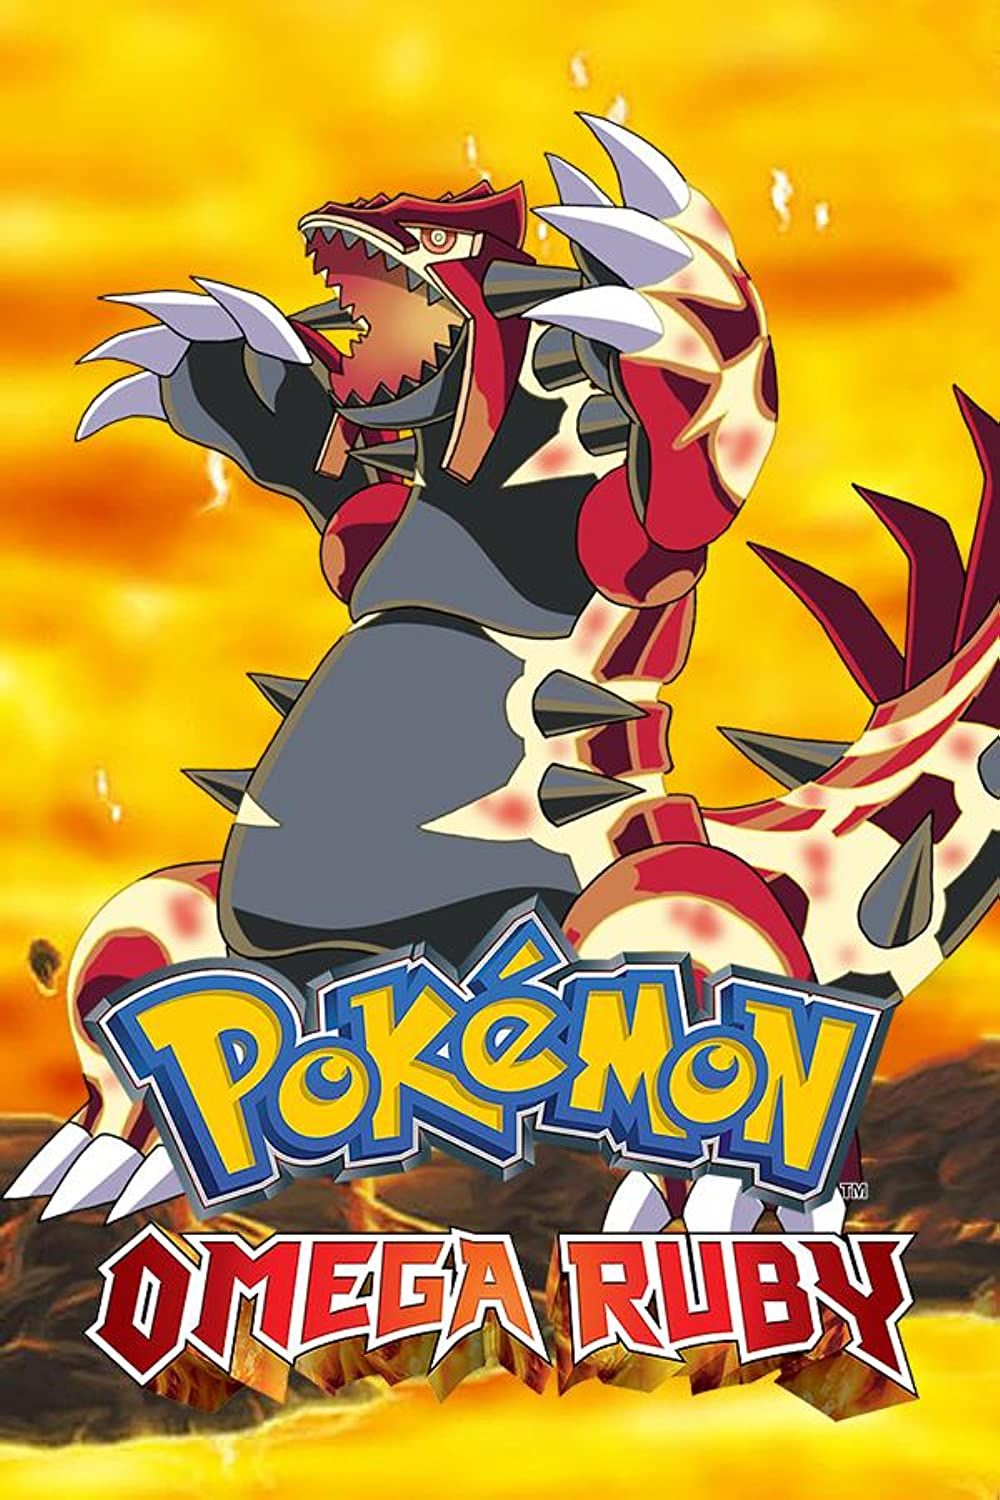 Pokemon Black and White Remakes Should Be More Omega Ruby/Alpha Sapphire,  Less Brilliant Diamond/Shining Pearl